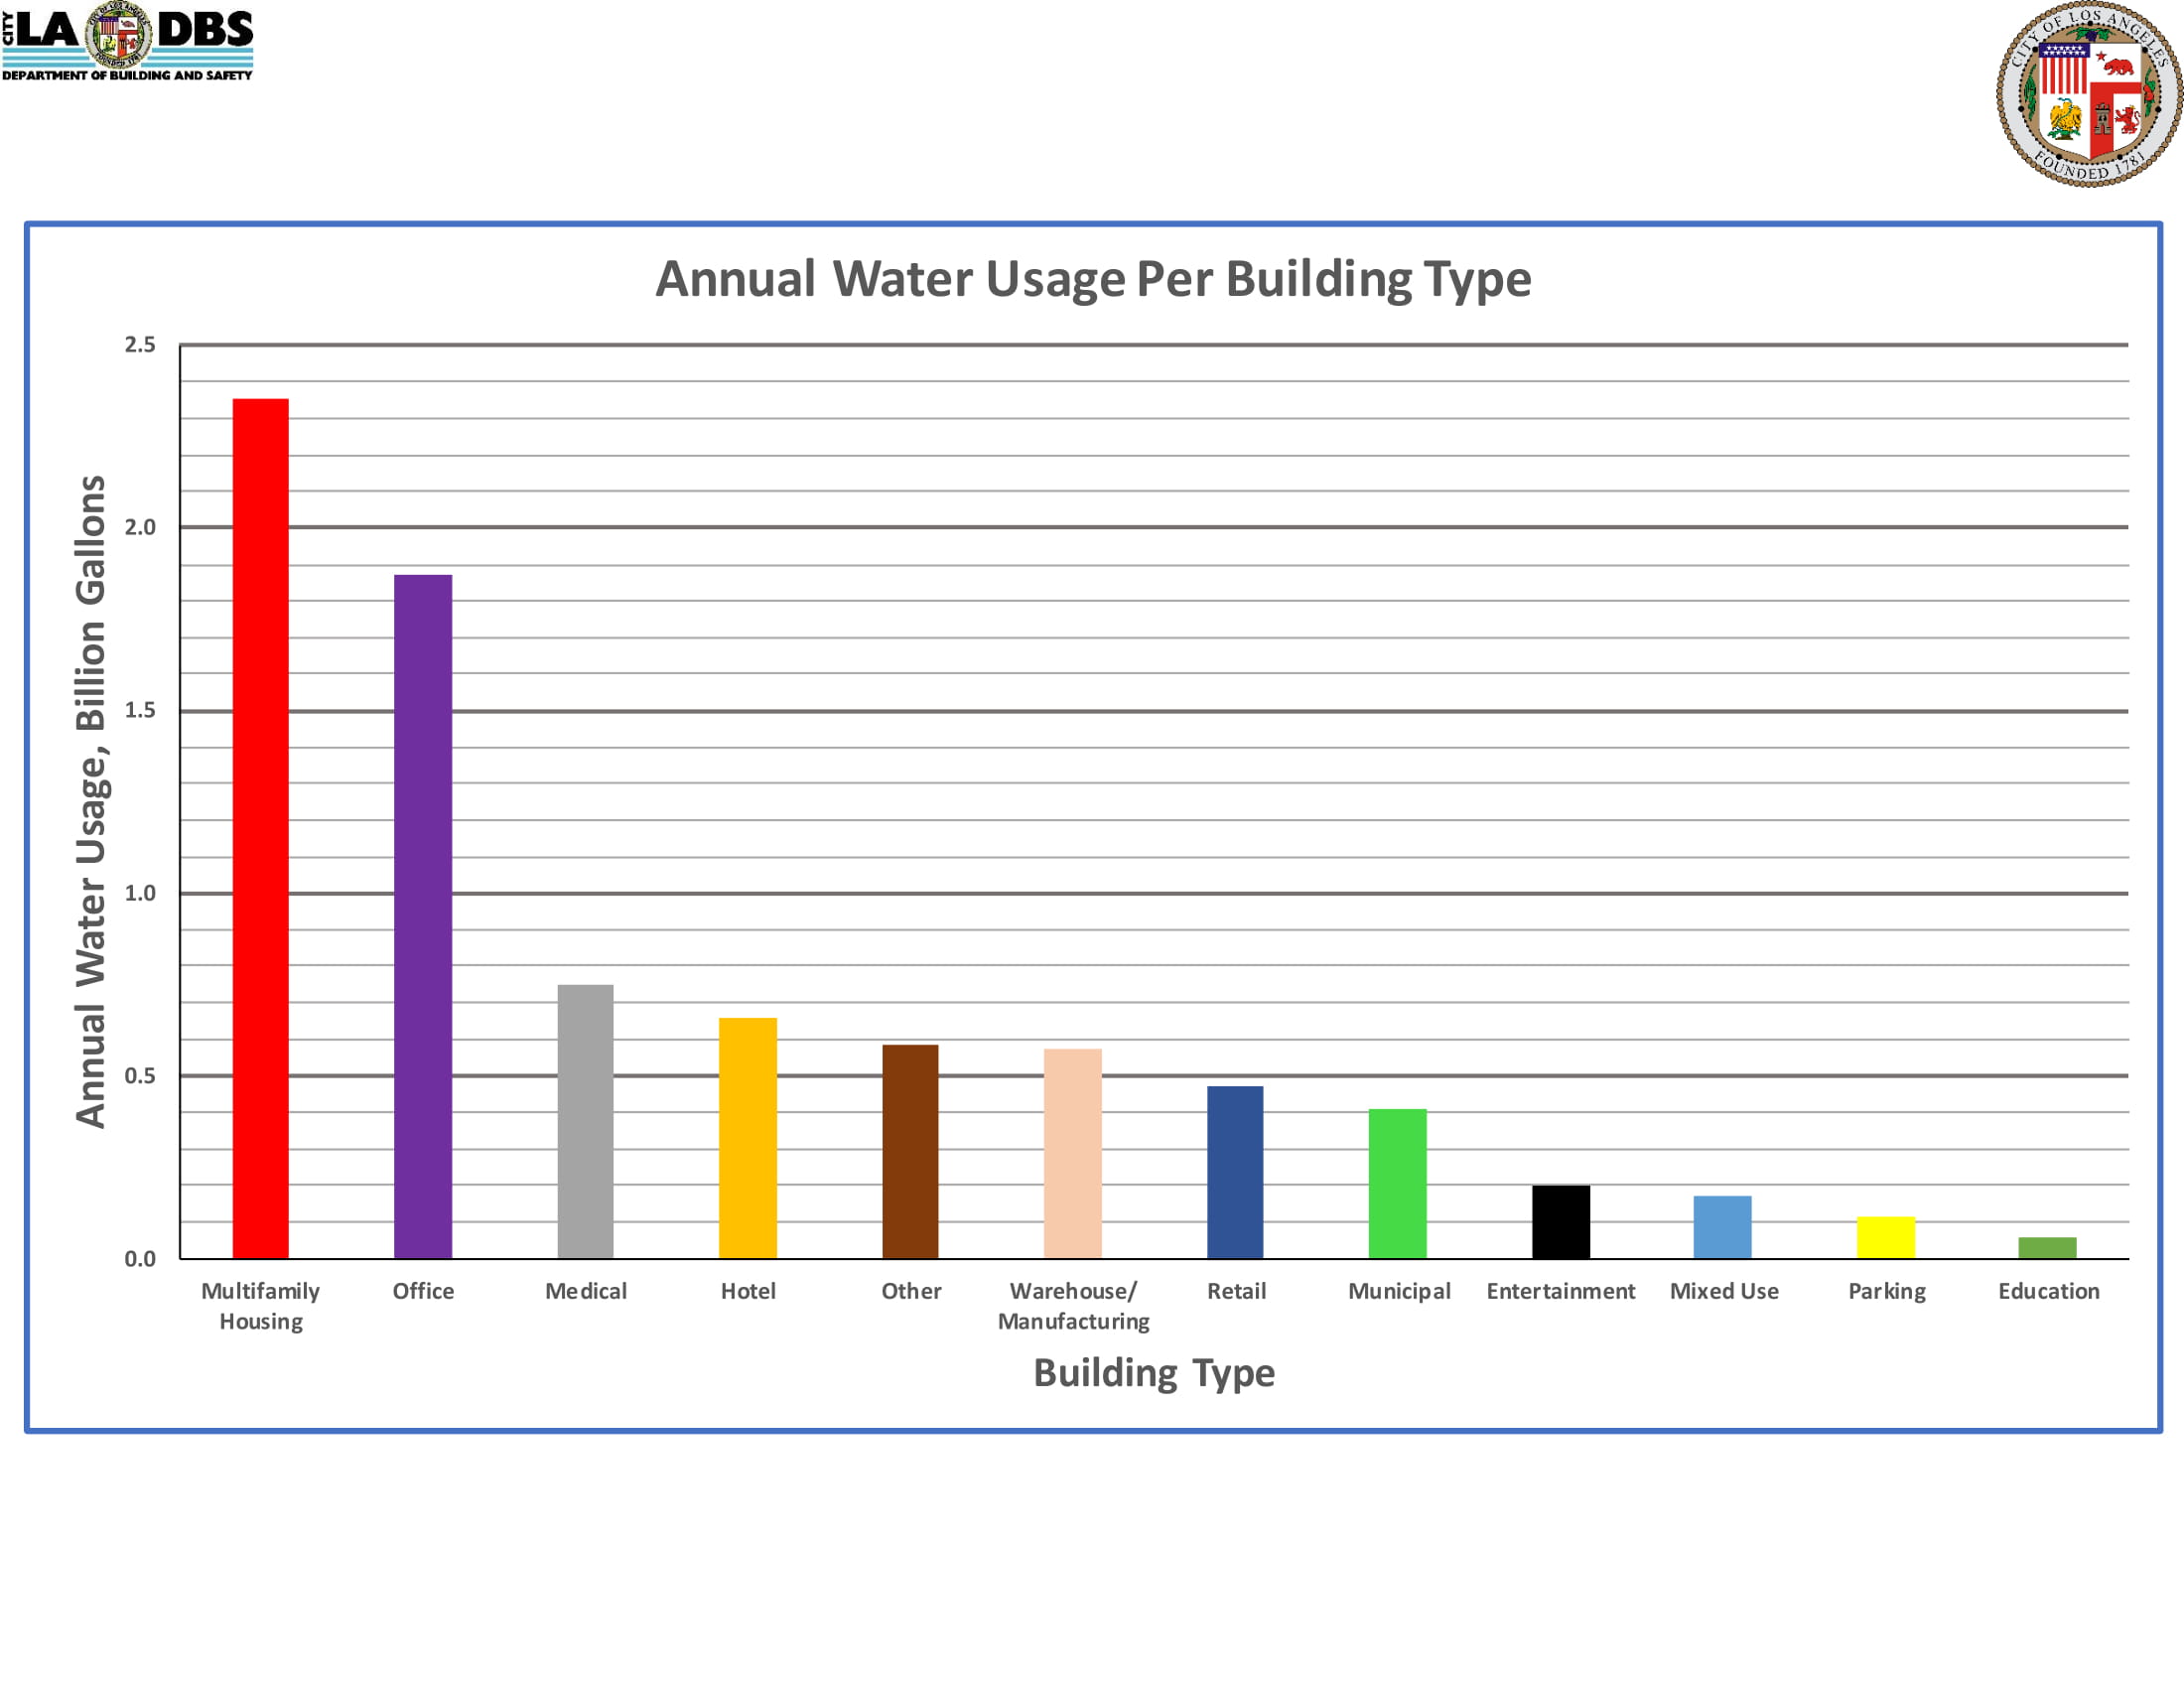 Annual Water Usage Per Building Type (Bar)